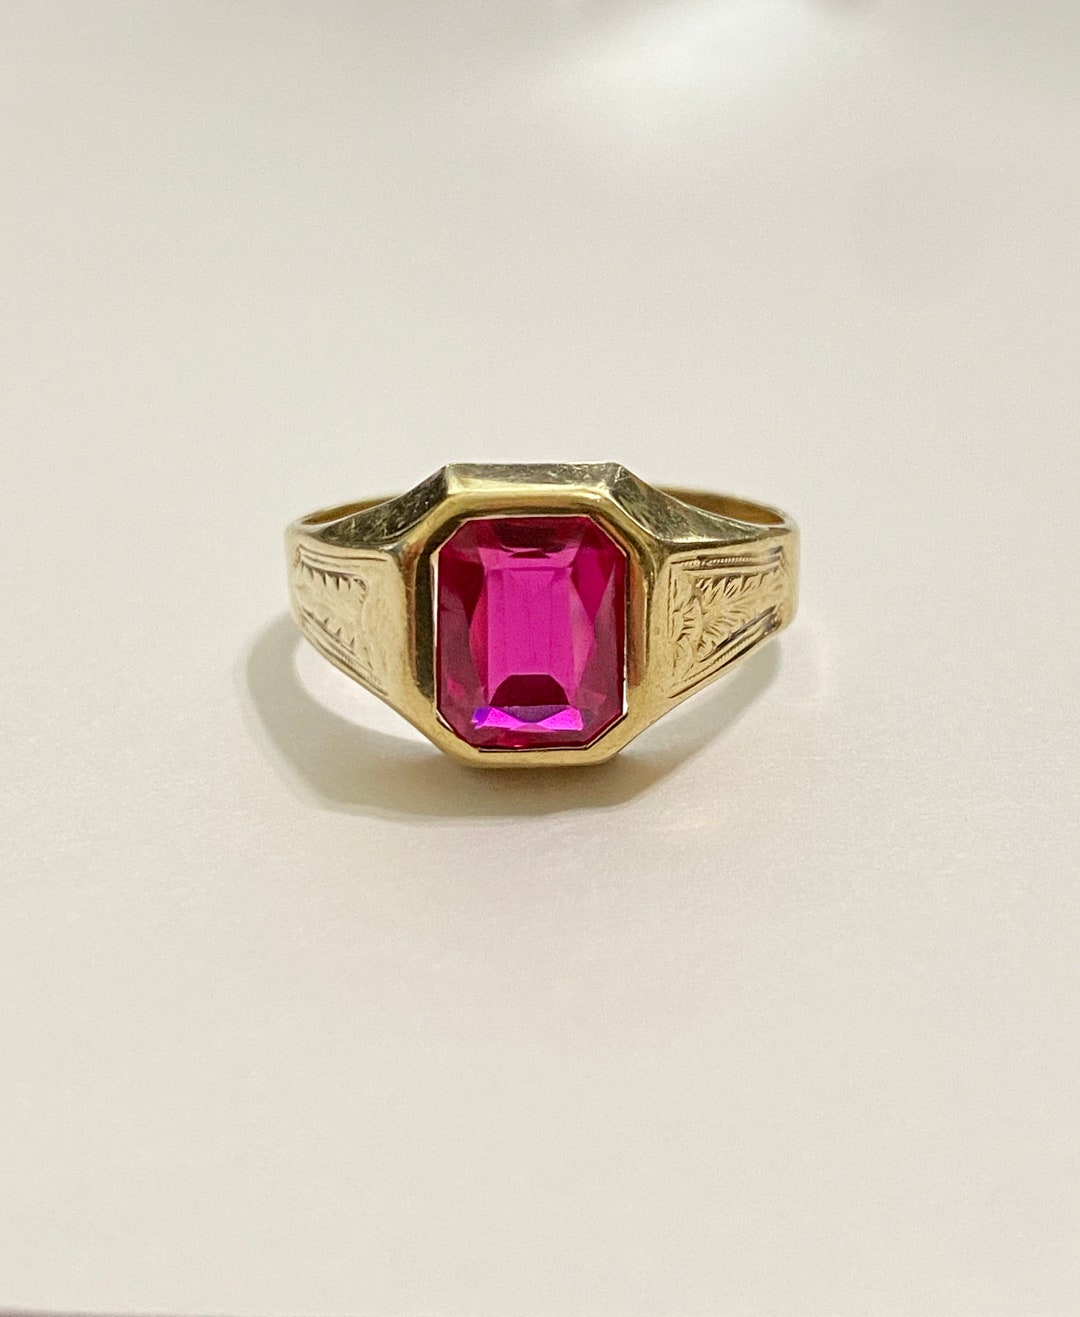 Antique 10k Yellow Gold 3.31 Carat Created Ruby Statement Ring - Etsy